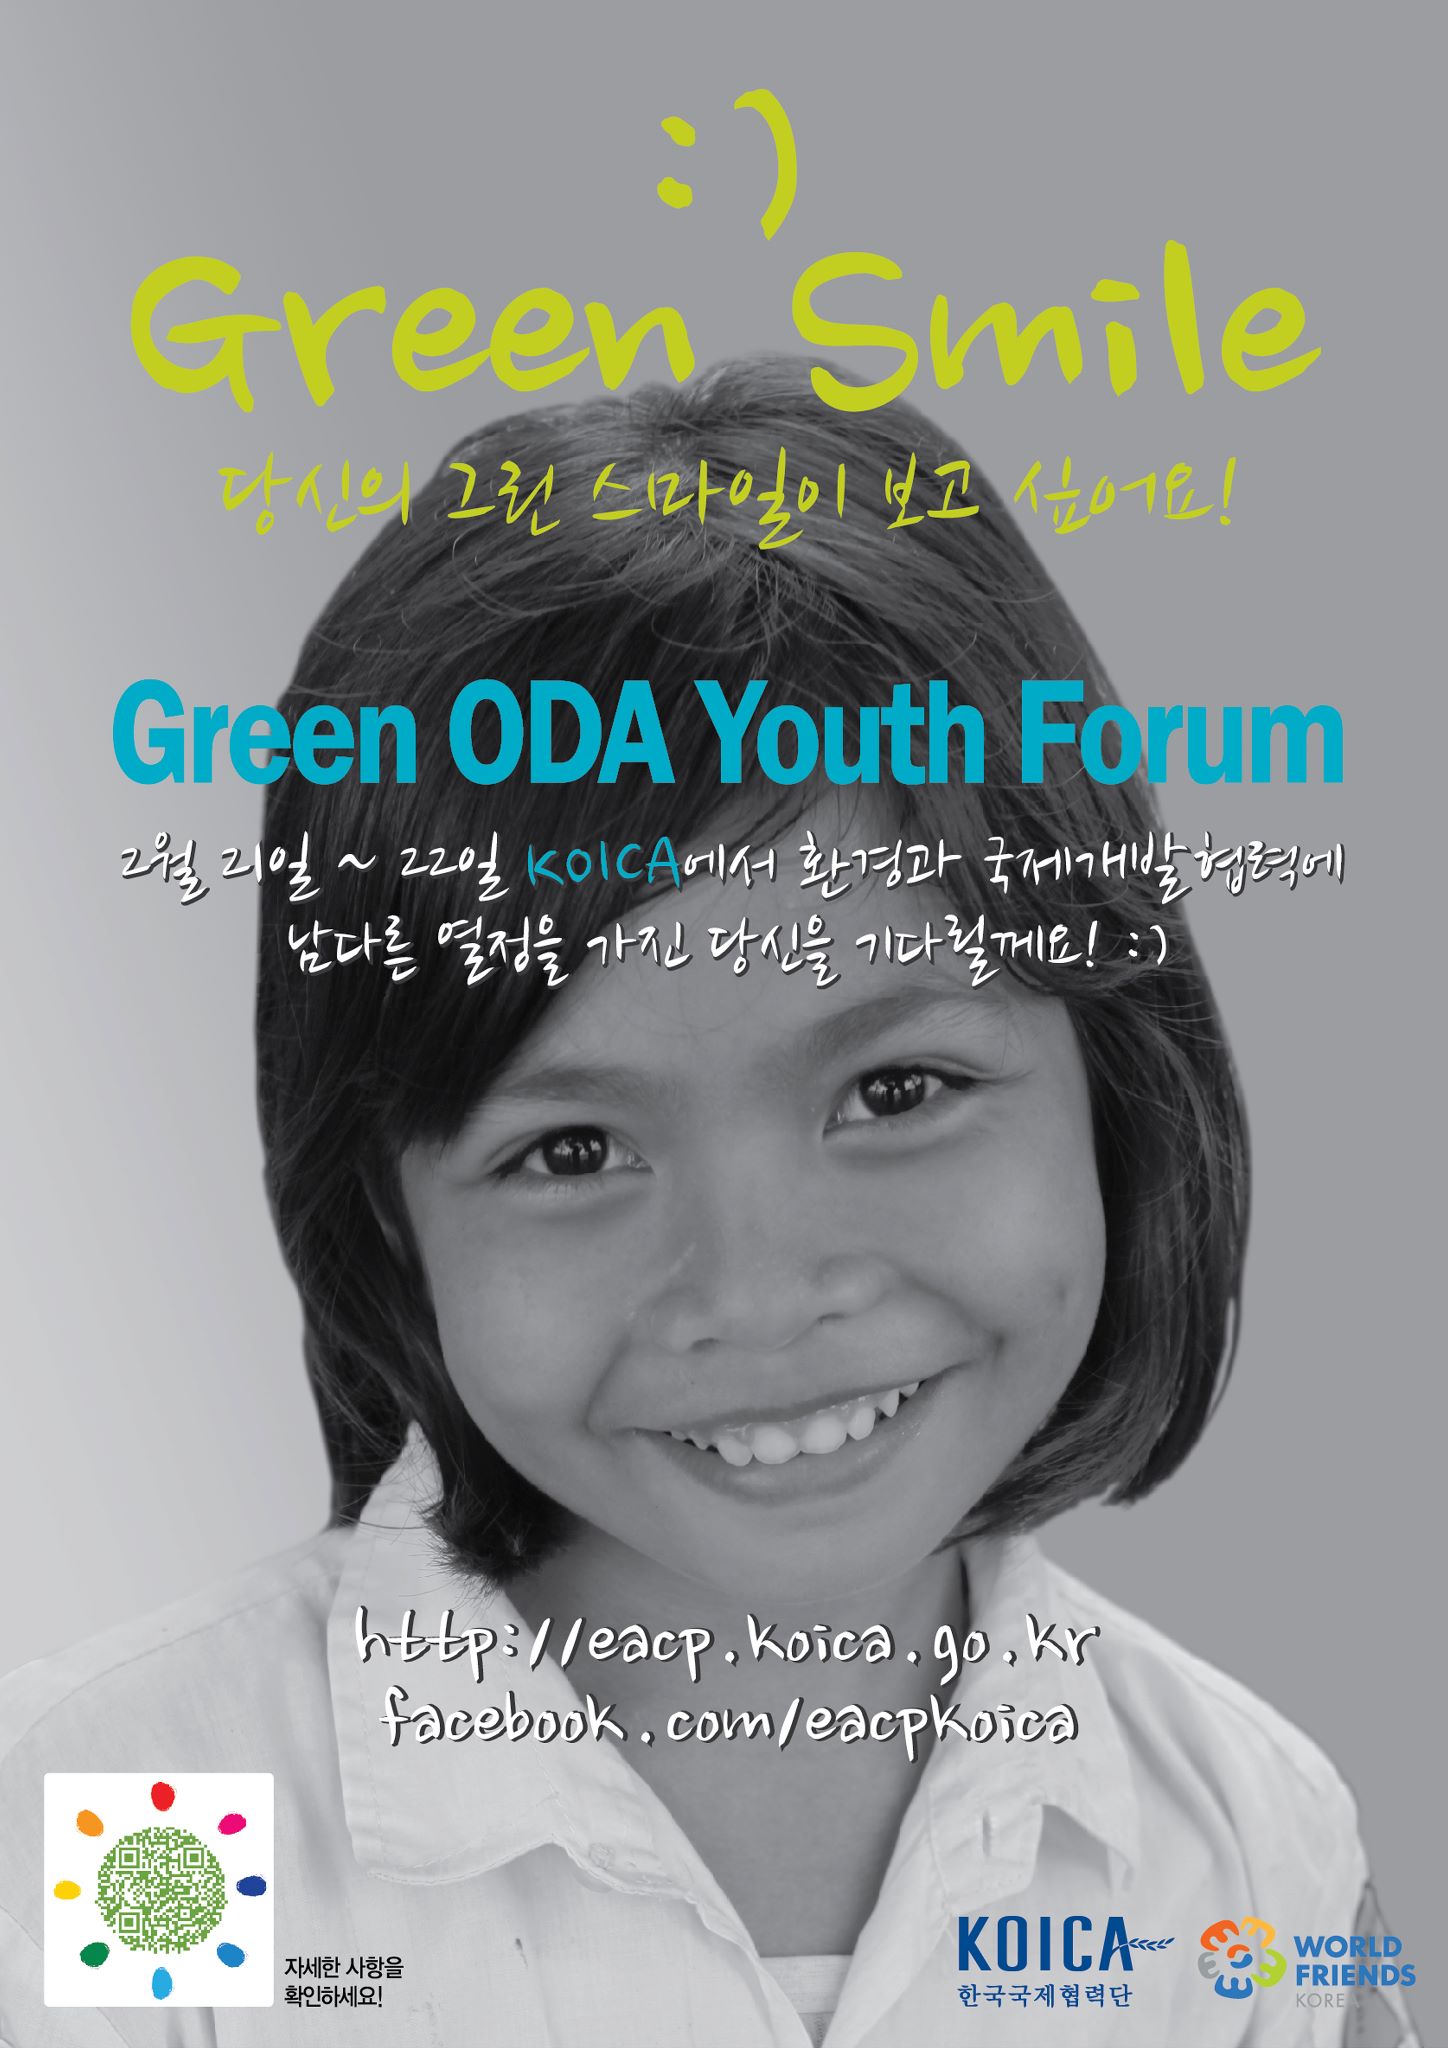 Sprout surported Green ODA Youth Forum